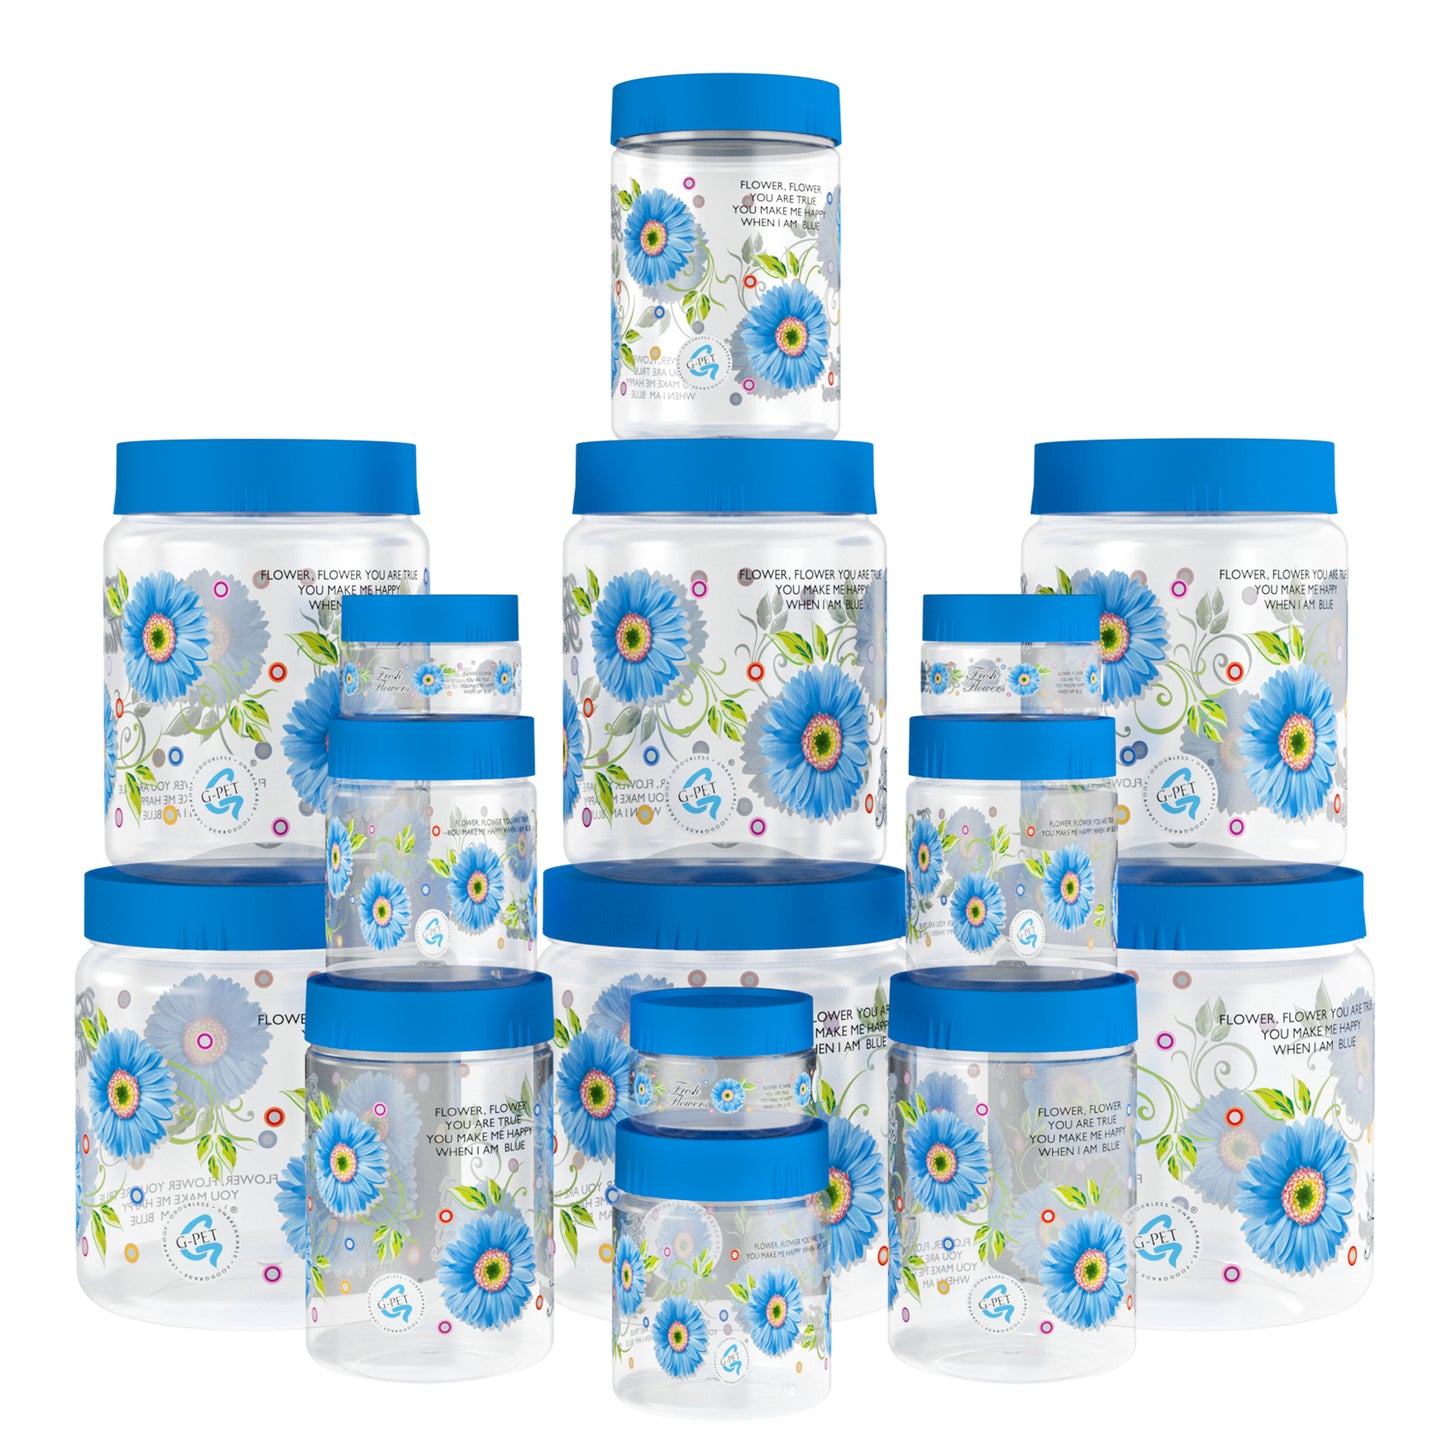 Print Magic Container Blue Pack of 15 - 1500ml (3 pcs), 1000ml (3 pcs), 450ml (3 pcs) 200ml (3 pcs), 50ml (3 pcs)